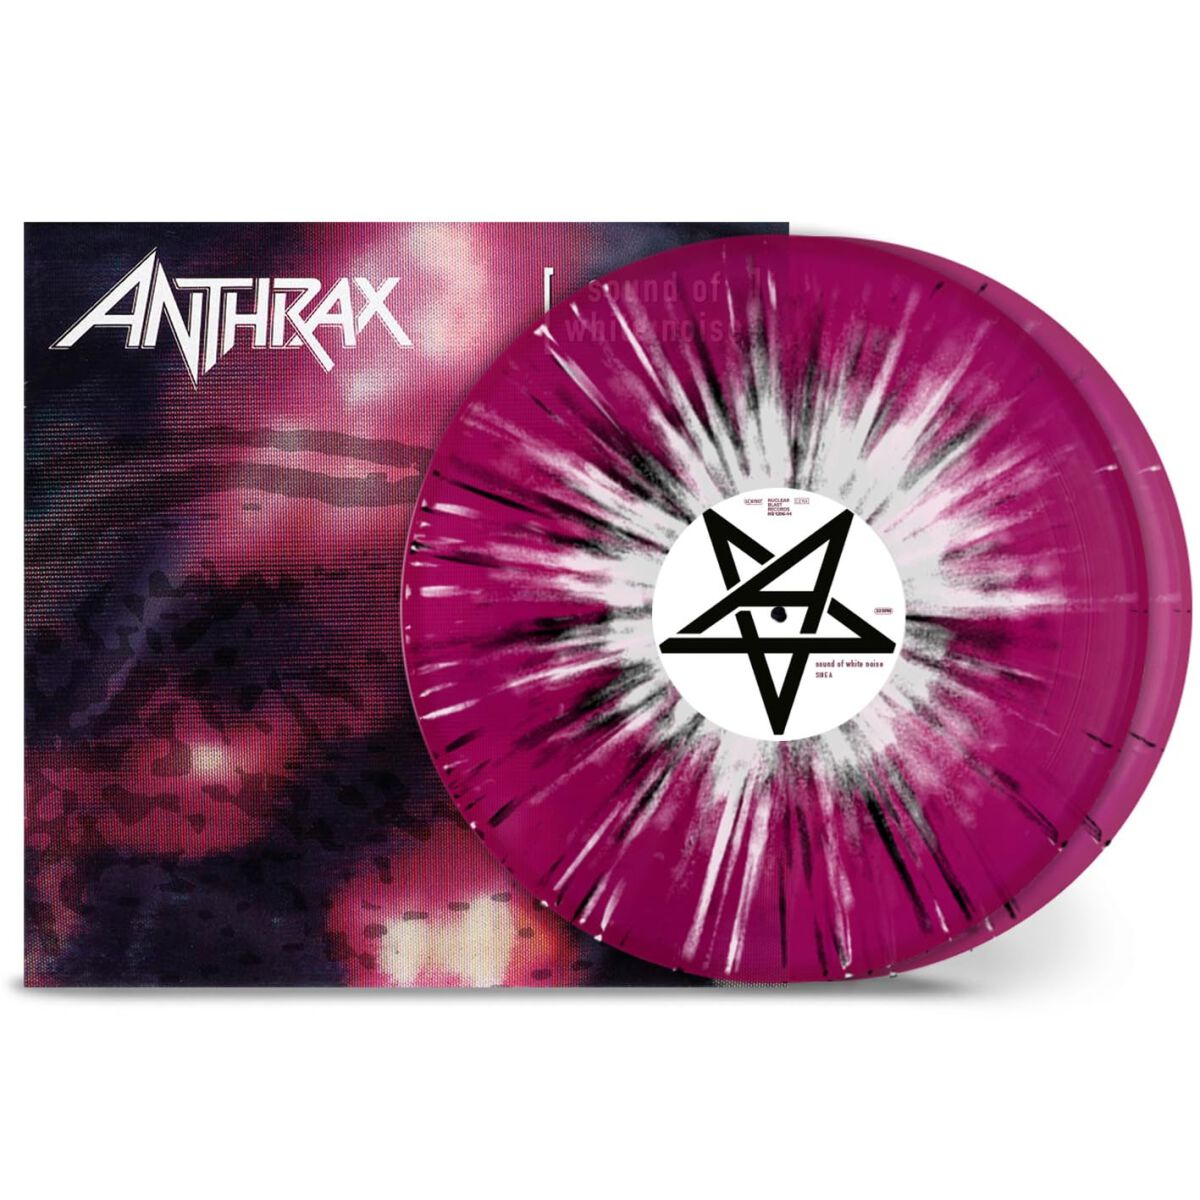 Anthrax Sound of white noise LP multicolor